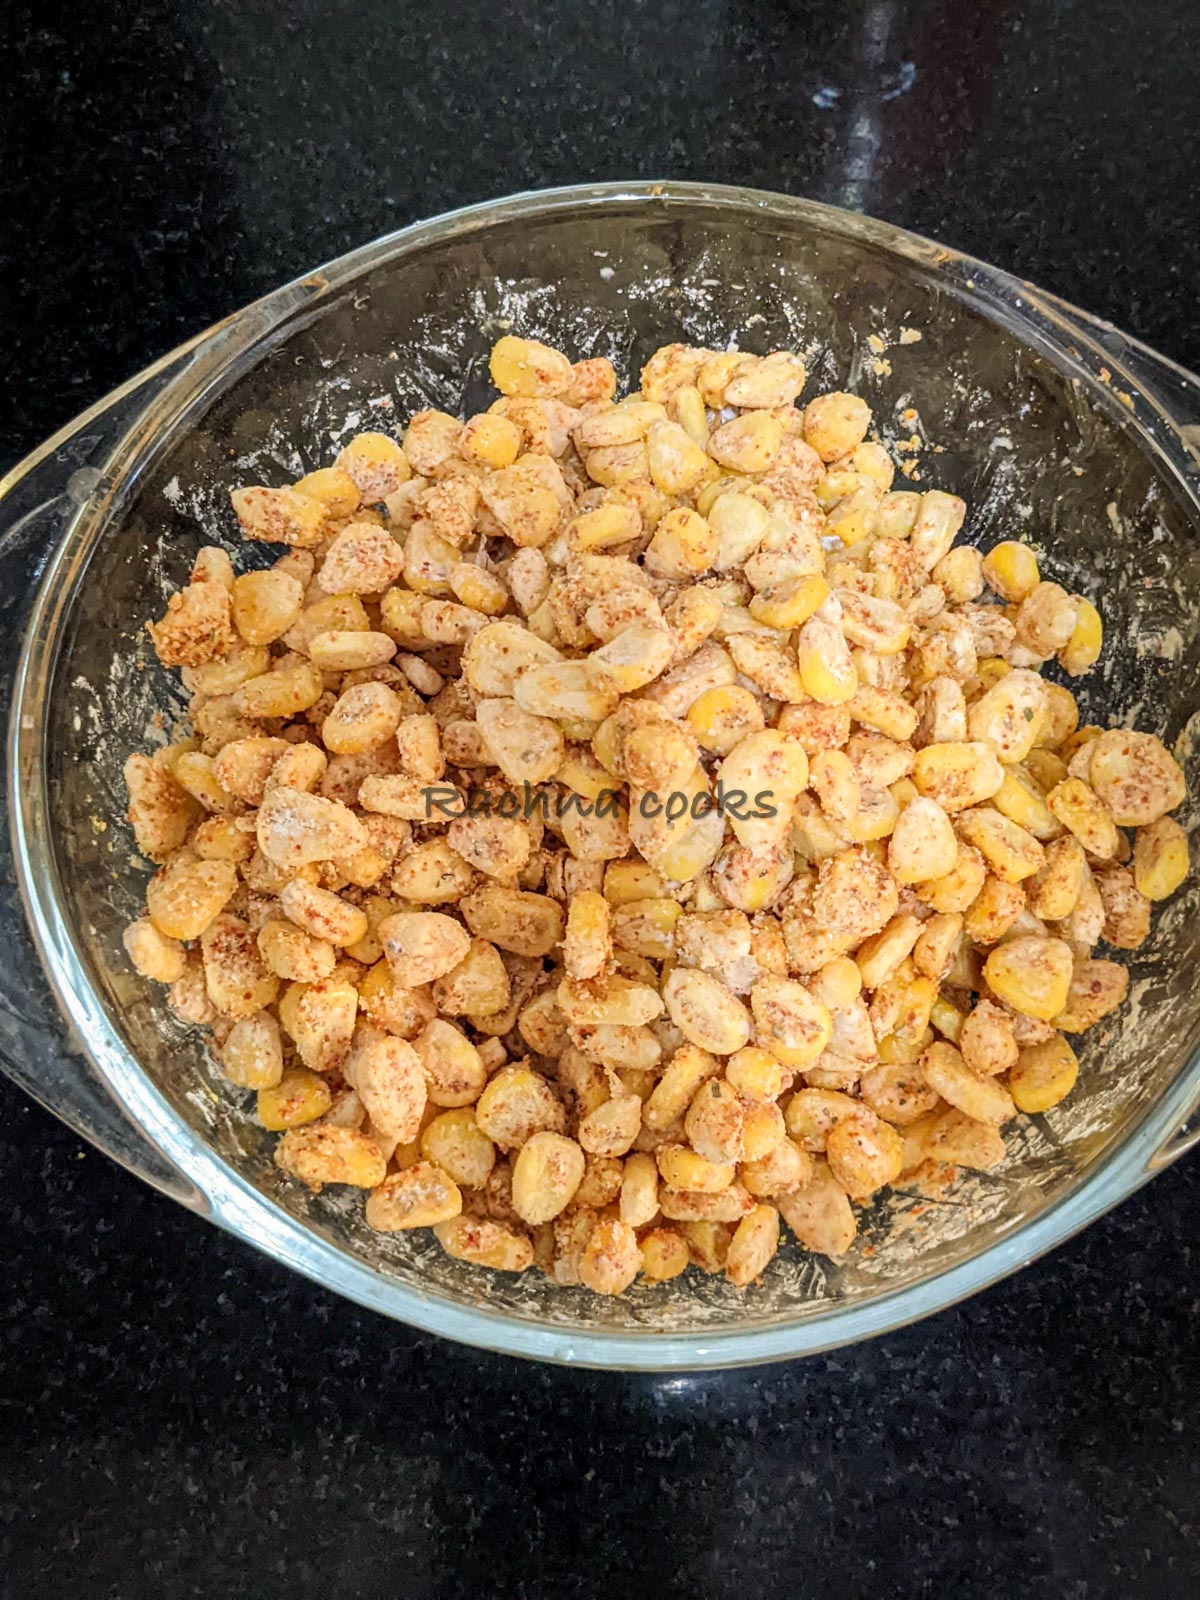 Coated corn after adding lemon juice and oil in a bowl.